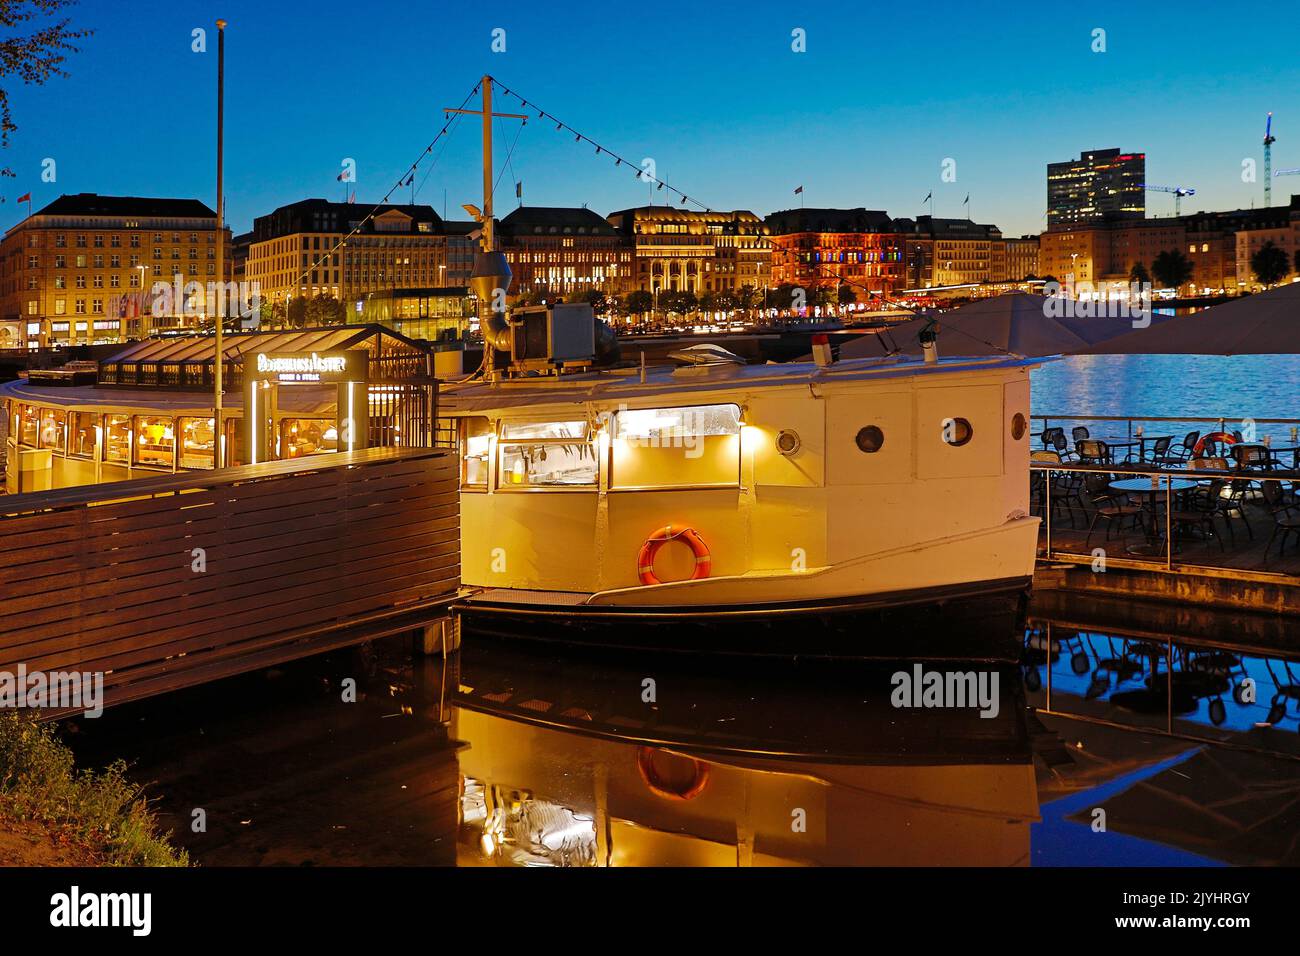 Restaurant ship 'Bootshaus Alster' at the Inner Alster Lake in the evening, Germany, Hamburg Stock Photo